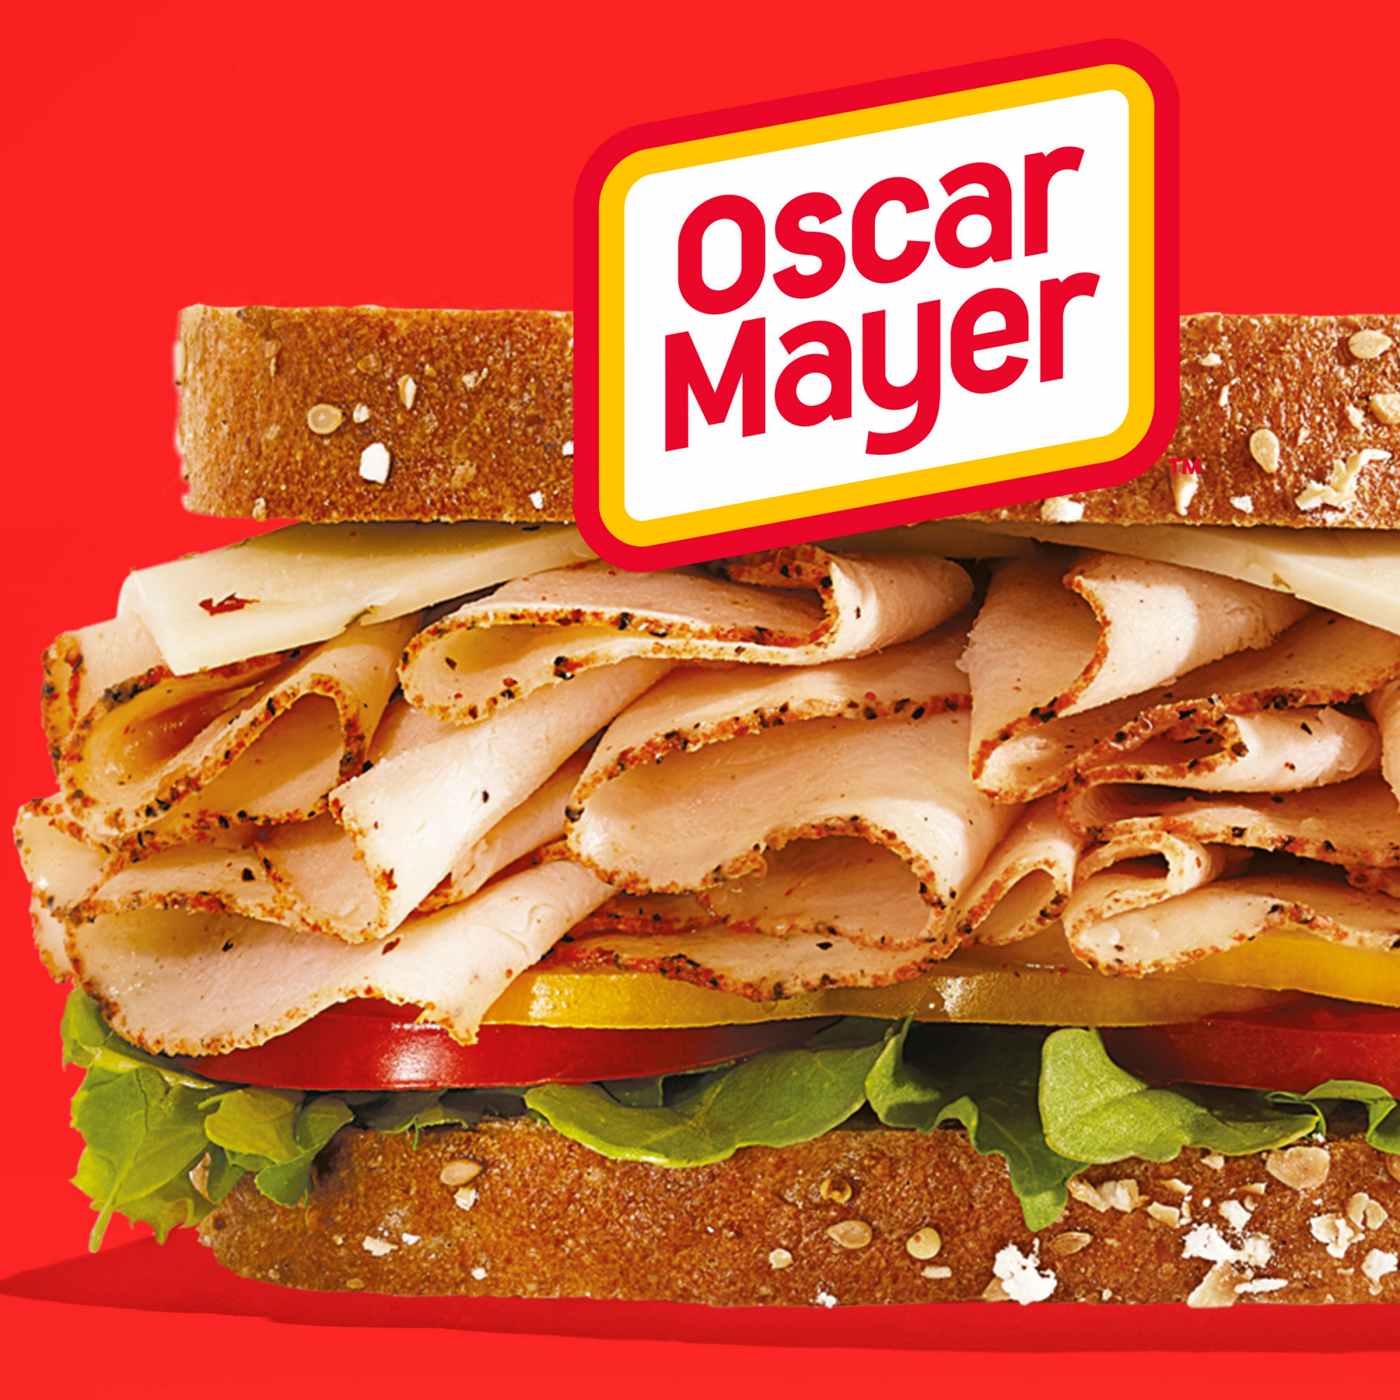 Oscar Mayer Deli Fresh Mesquite Smoked Sliced Turkey Breast Lunch Meat; image 5 of 7